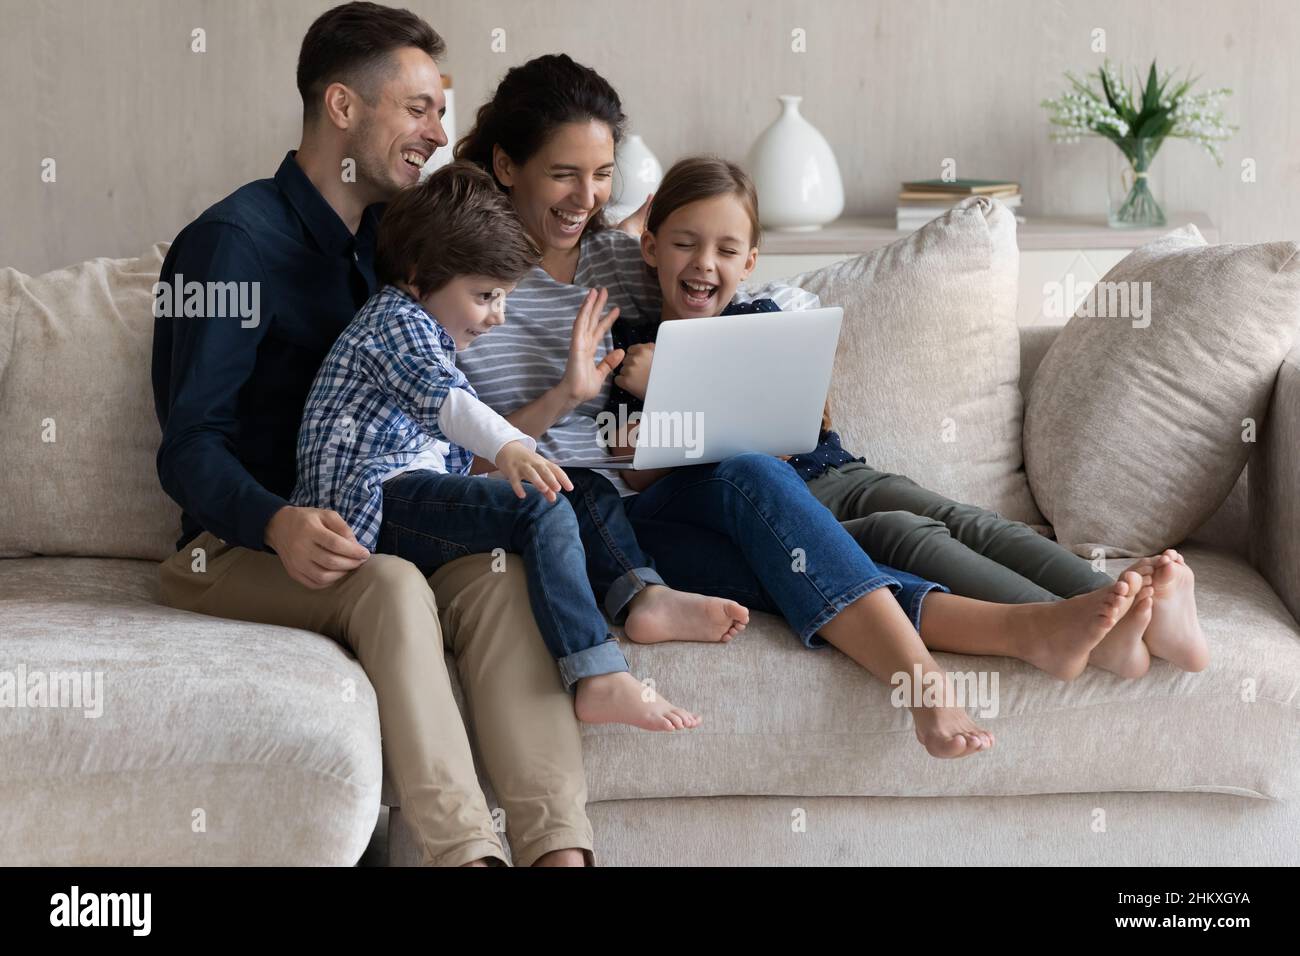 Happy parents with two kids making video call together Stock Photo